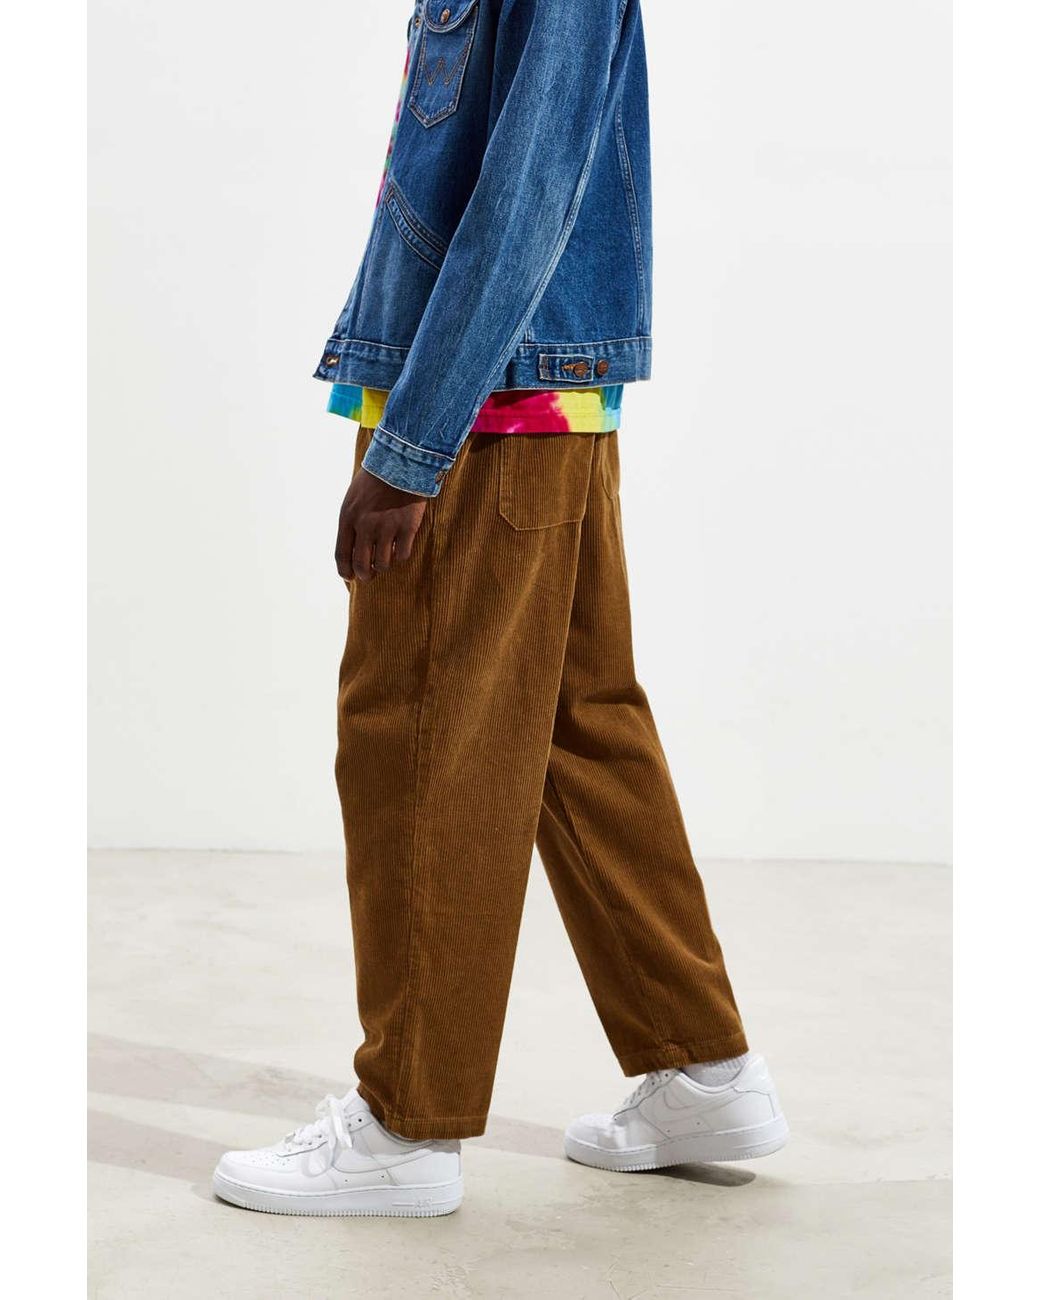 frame Inform marriage Urban Outfitters Uo Corduroy Beach Pant for Men | Lyst